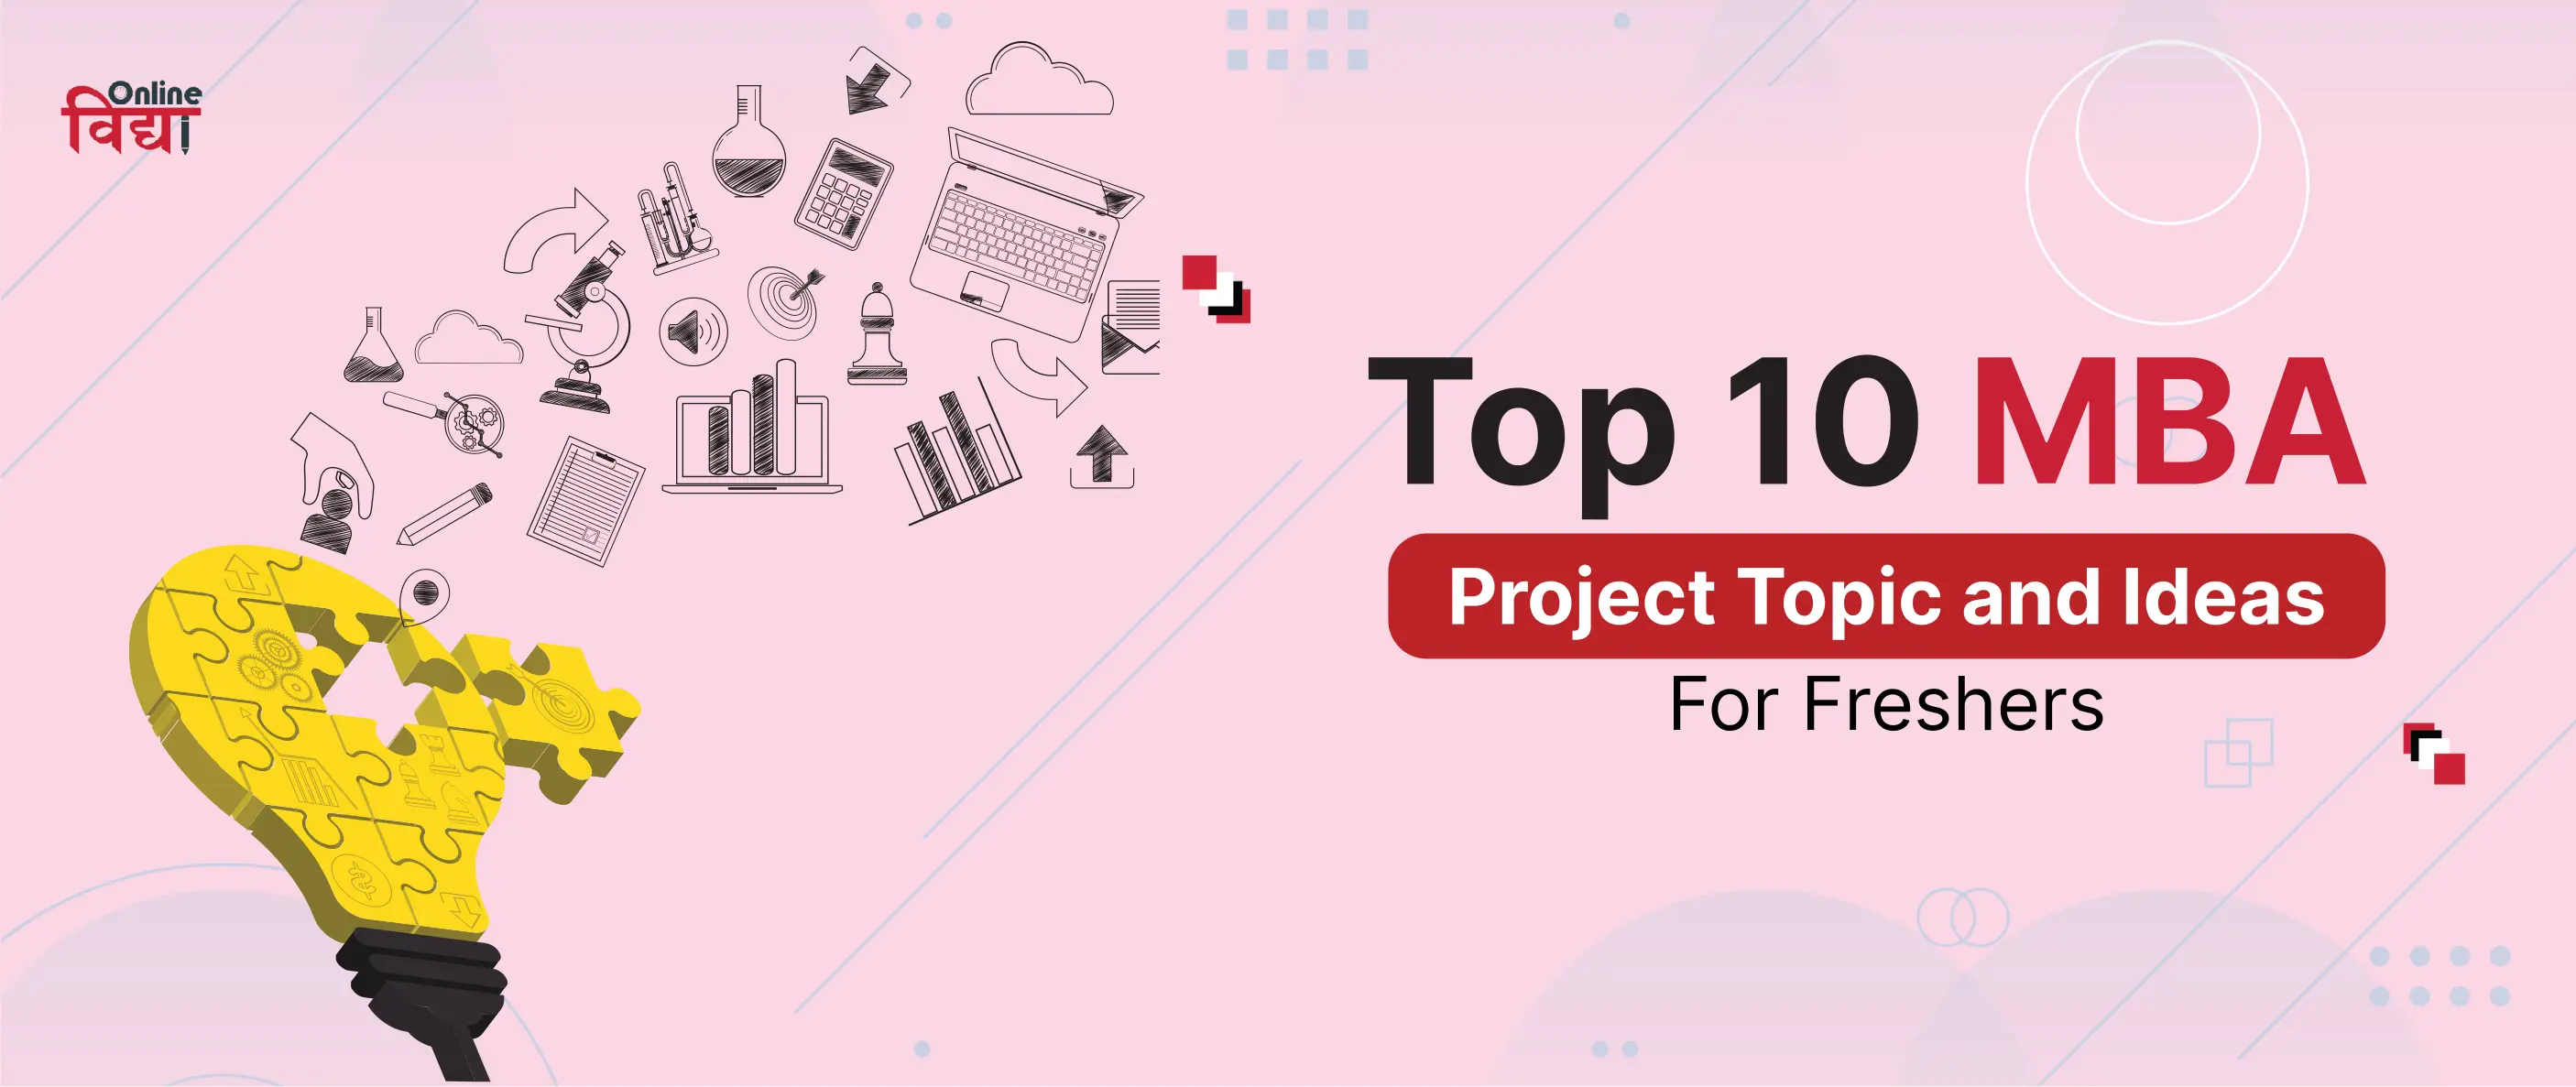 Top 10 MBA Project Topics & Ideas  [For Freshers]